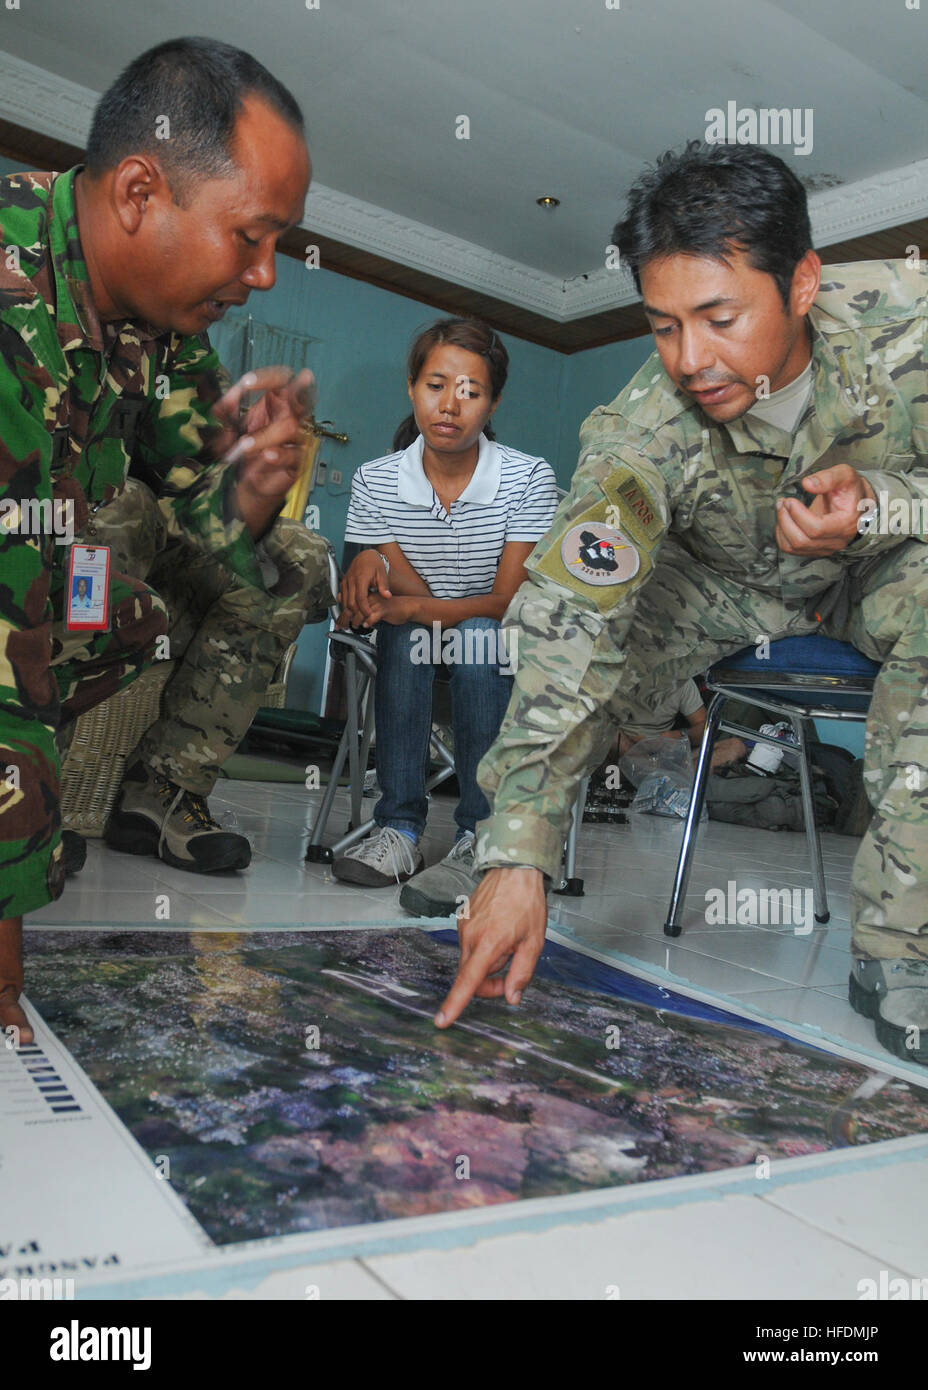 U.S. Air Force Staff Sgt. Christopher Lugo, right, assigned to the 353rd Special Operations Group, points out damaged aviation navigation aids during a meeting with Indonesian airmen at Ta Bing Air Field in Padang, Indonesia, Oct. 7, 2009. The service members are meeting to discuss the restoration of the aids to better facilitate flight operations in support of ongoing humanitarian relief efforts in Padang. The U.S. military is responding to a request for assistance by the Indonesian government after a 7.6 magnitude earthquake struck the country Sept. 30, 2009. (DoD photo by Mass Communication Stock Photo